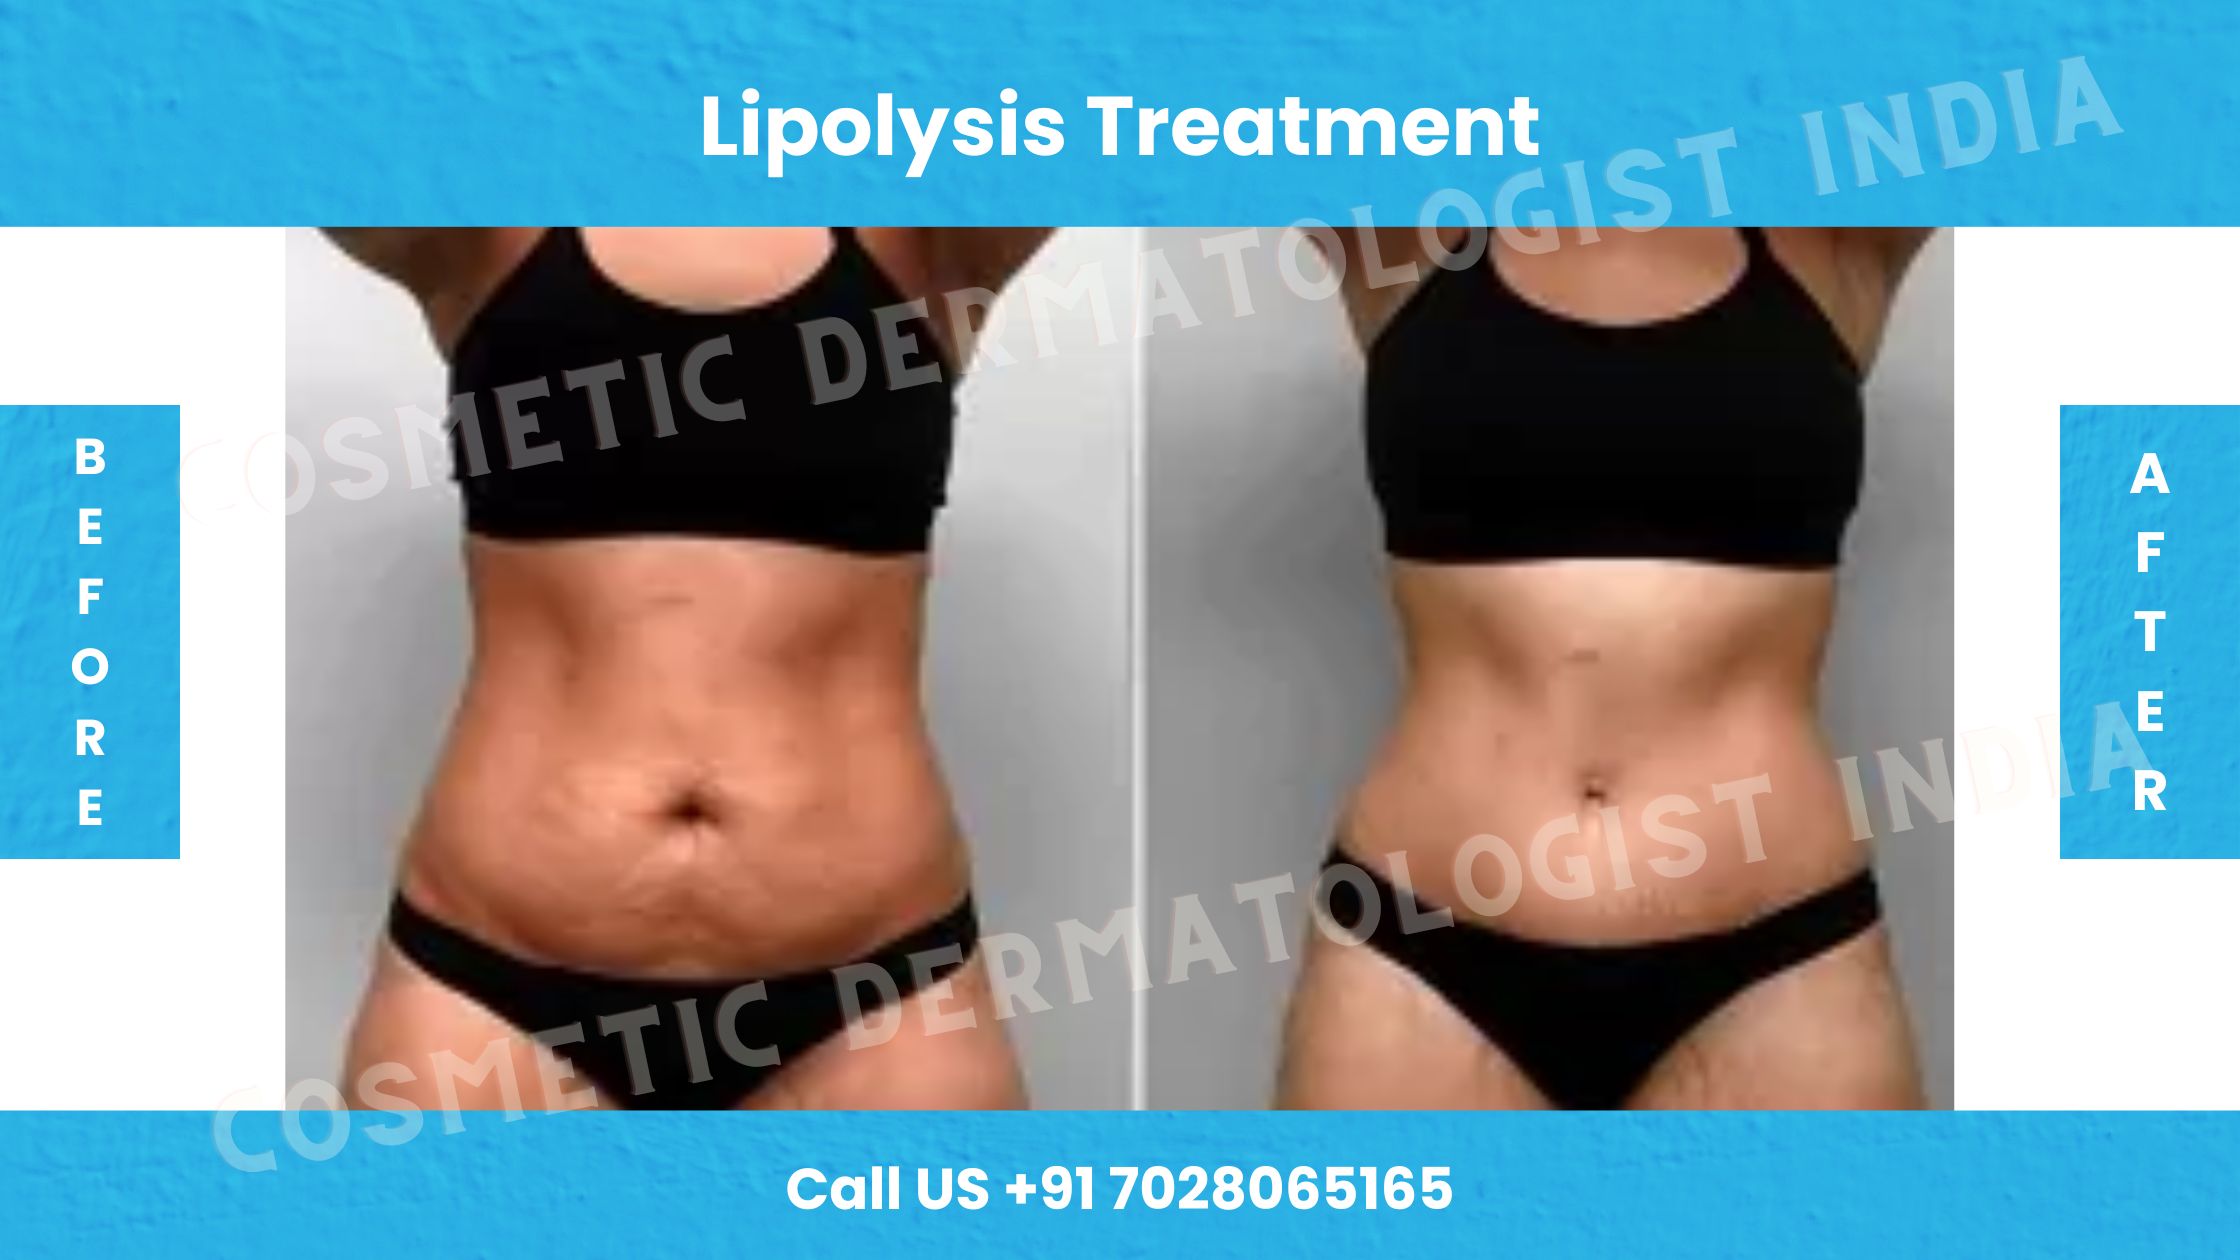 Before and After Photos For Lipolysis Treatment 